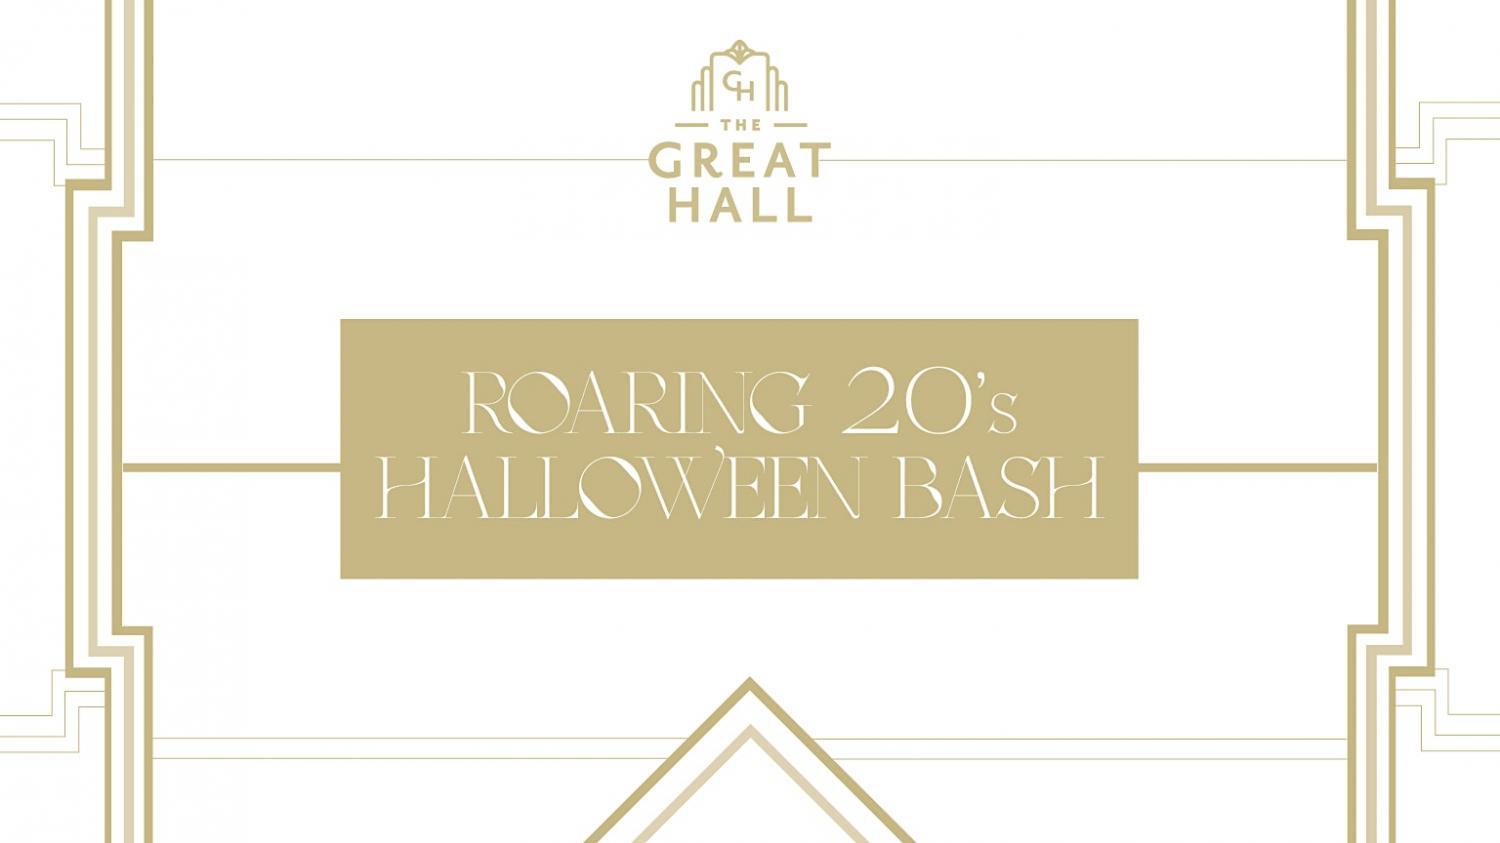 Roaring 20s Halloween Bash - The Great Hall at First National Center
Sat Oct 29, 7:00 PM - Sun Oct 30, 7:00 PM
in 9 days